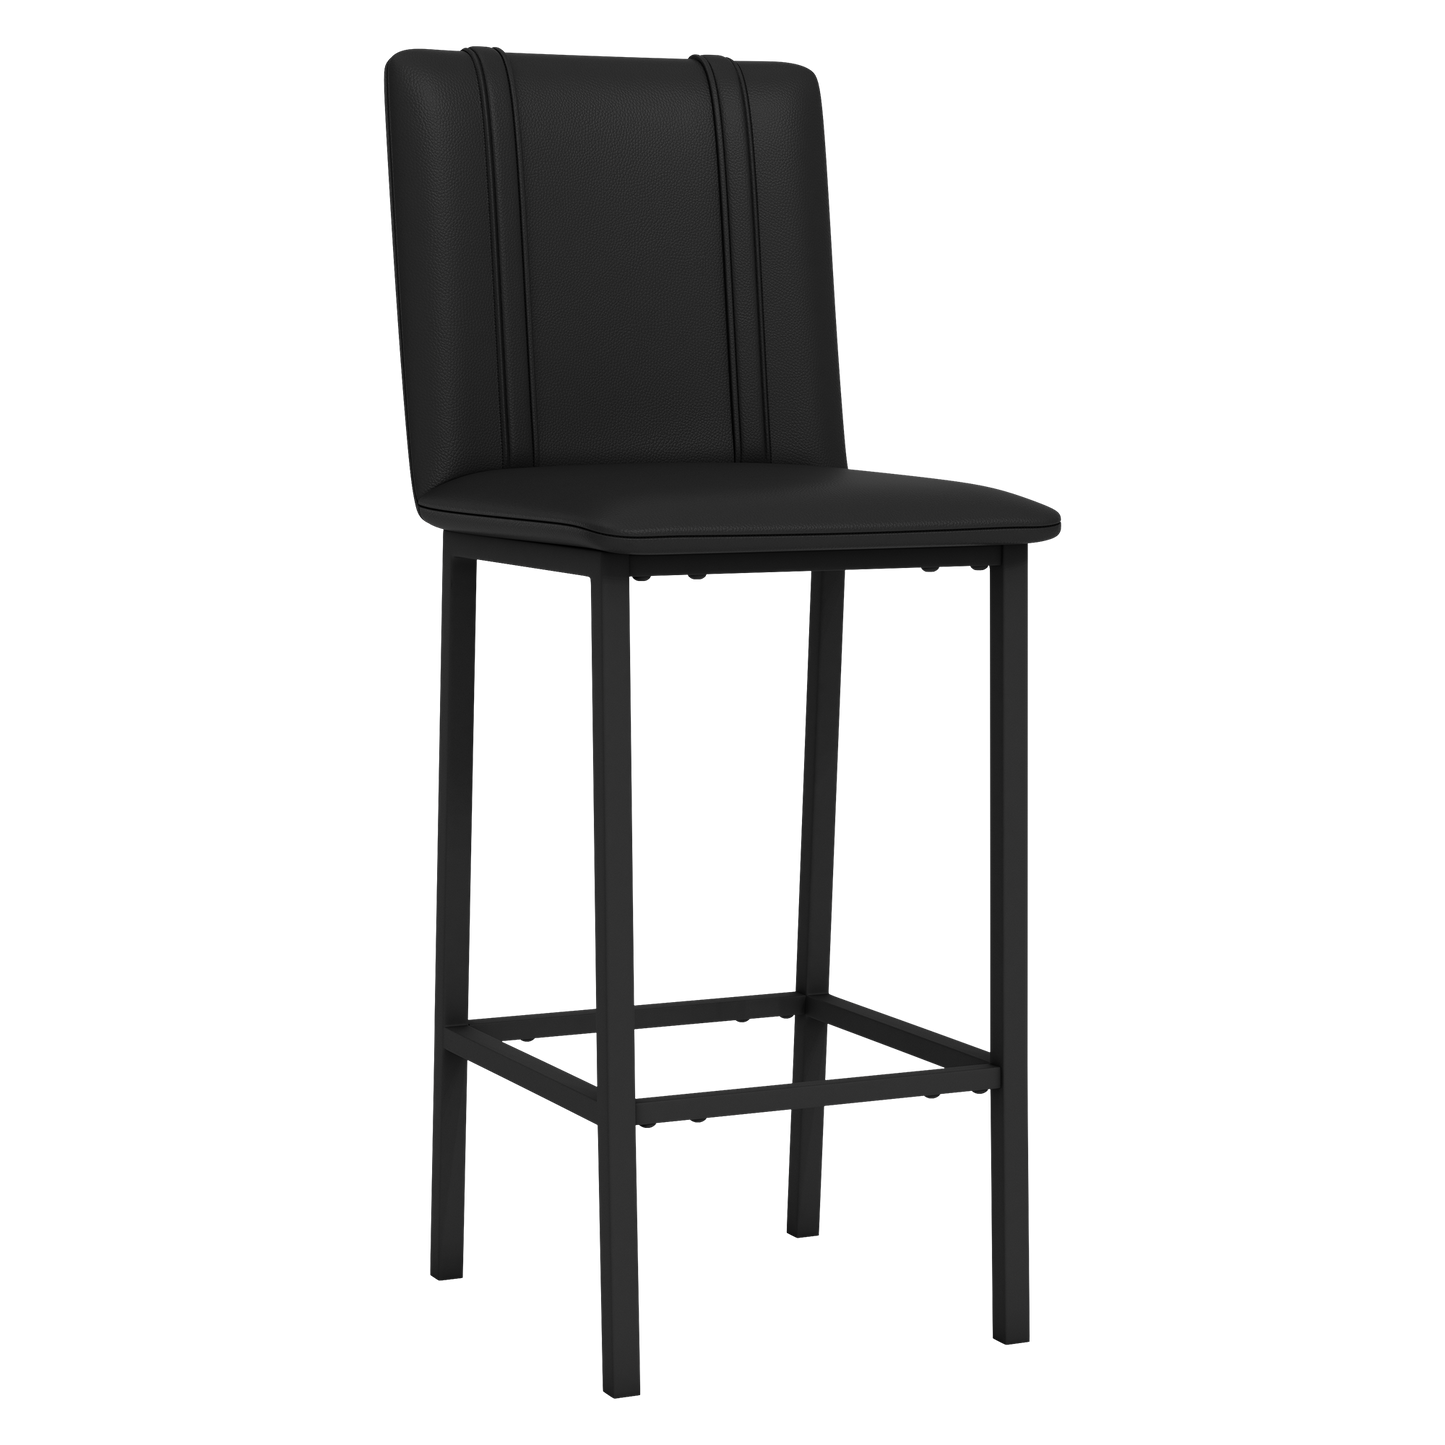 Bar Stool 500 with Texas Longhorns Primary Set of 2